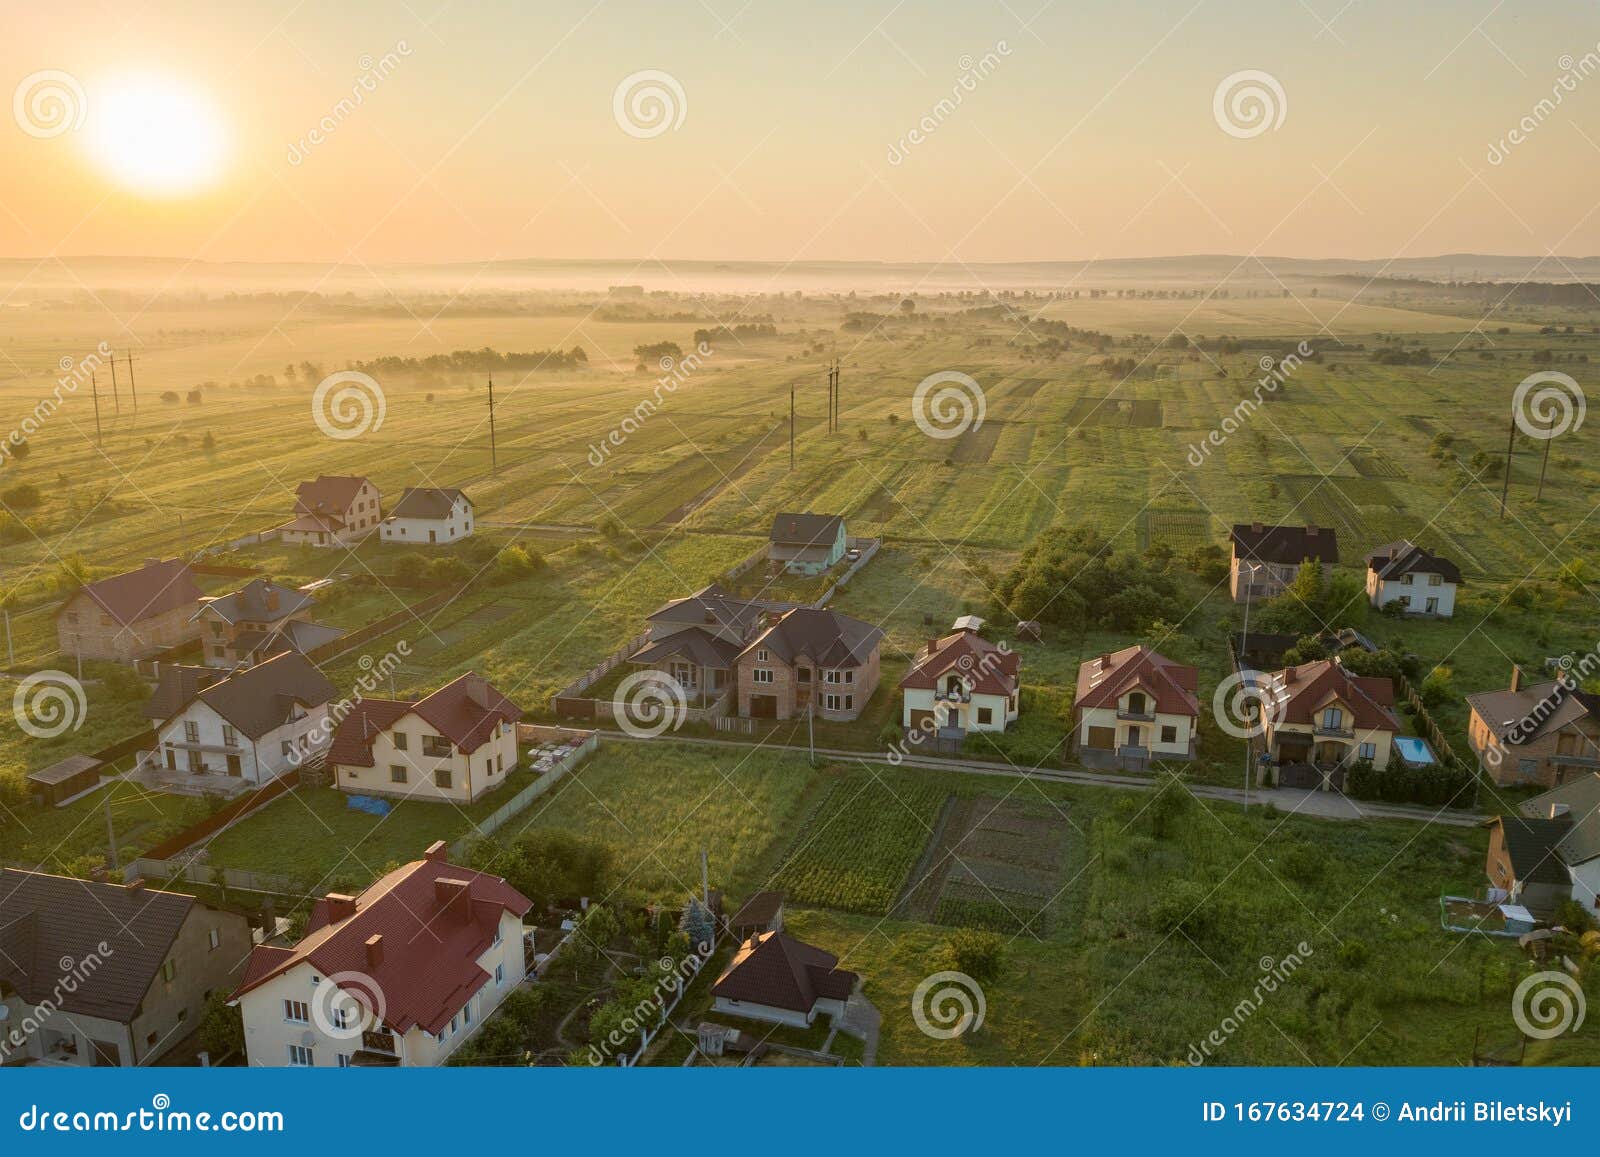 aerial view of rural residential area with private homes between green fields at sunrise